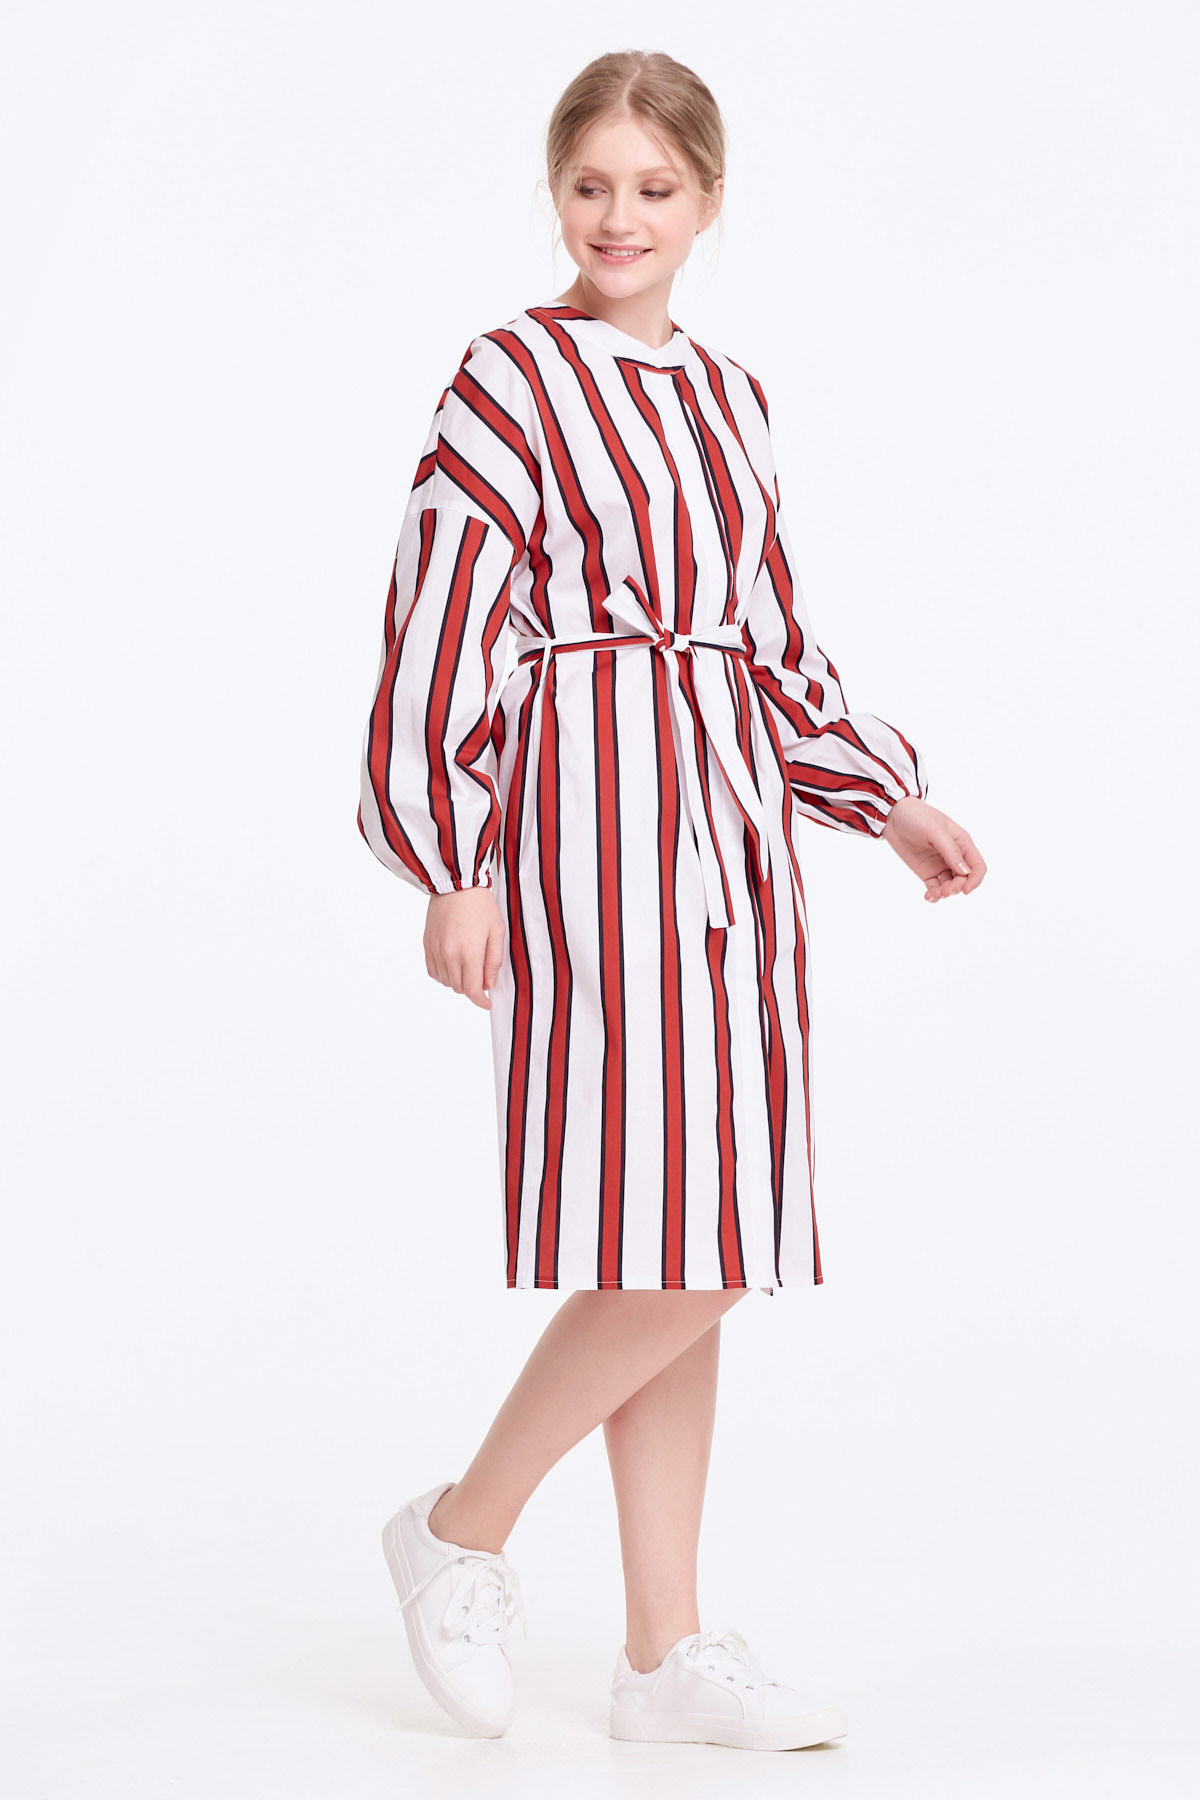 White dress with red and black stripes, photo 7